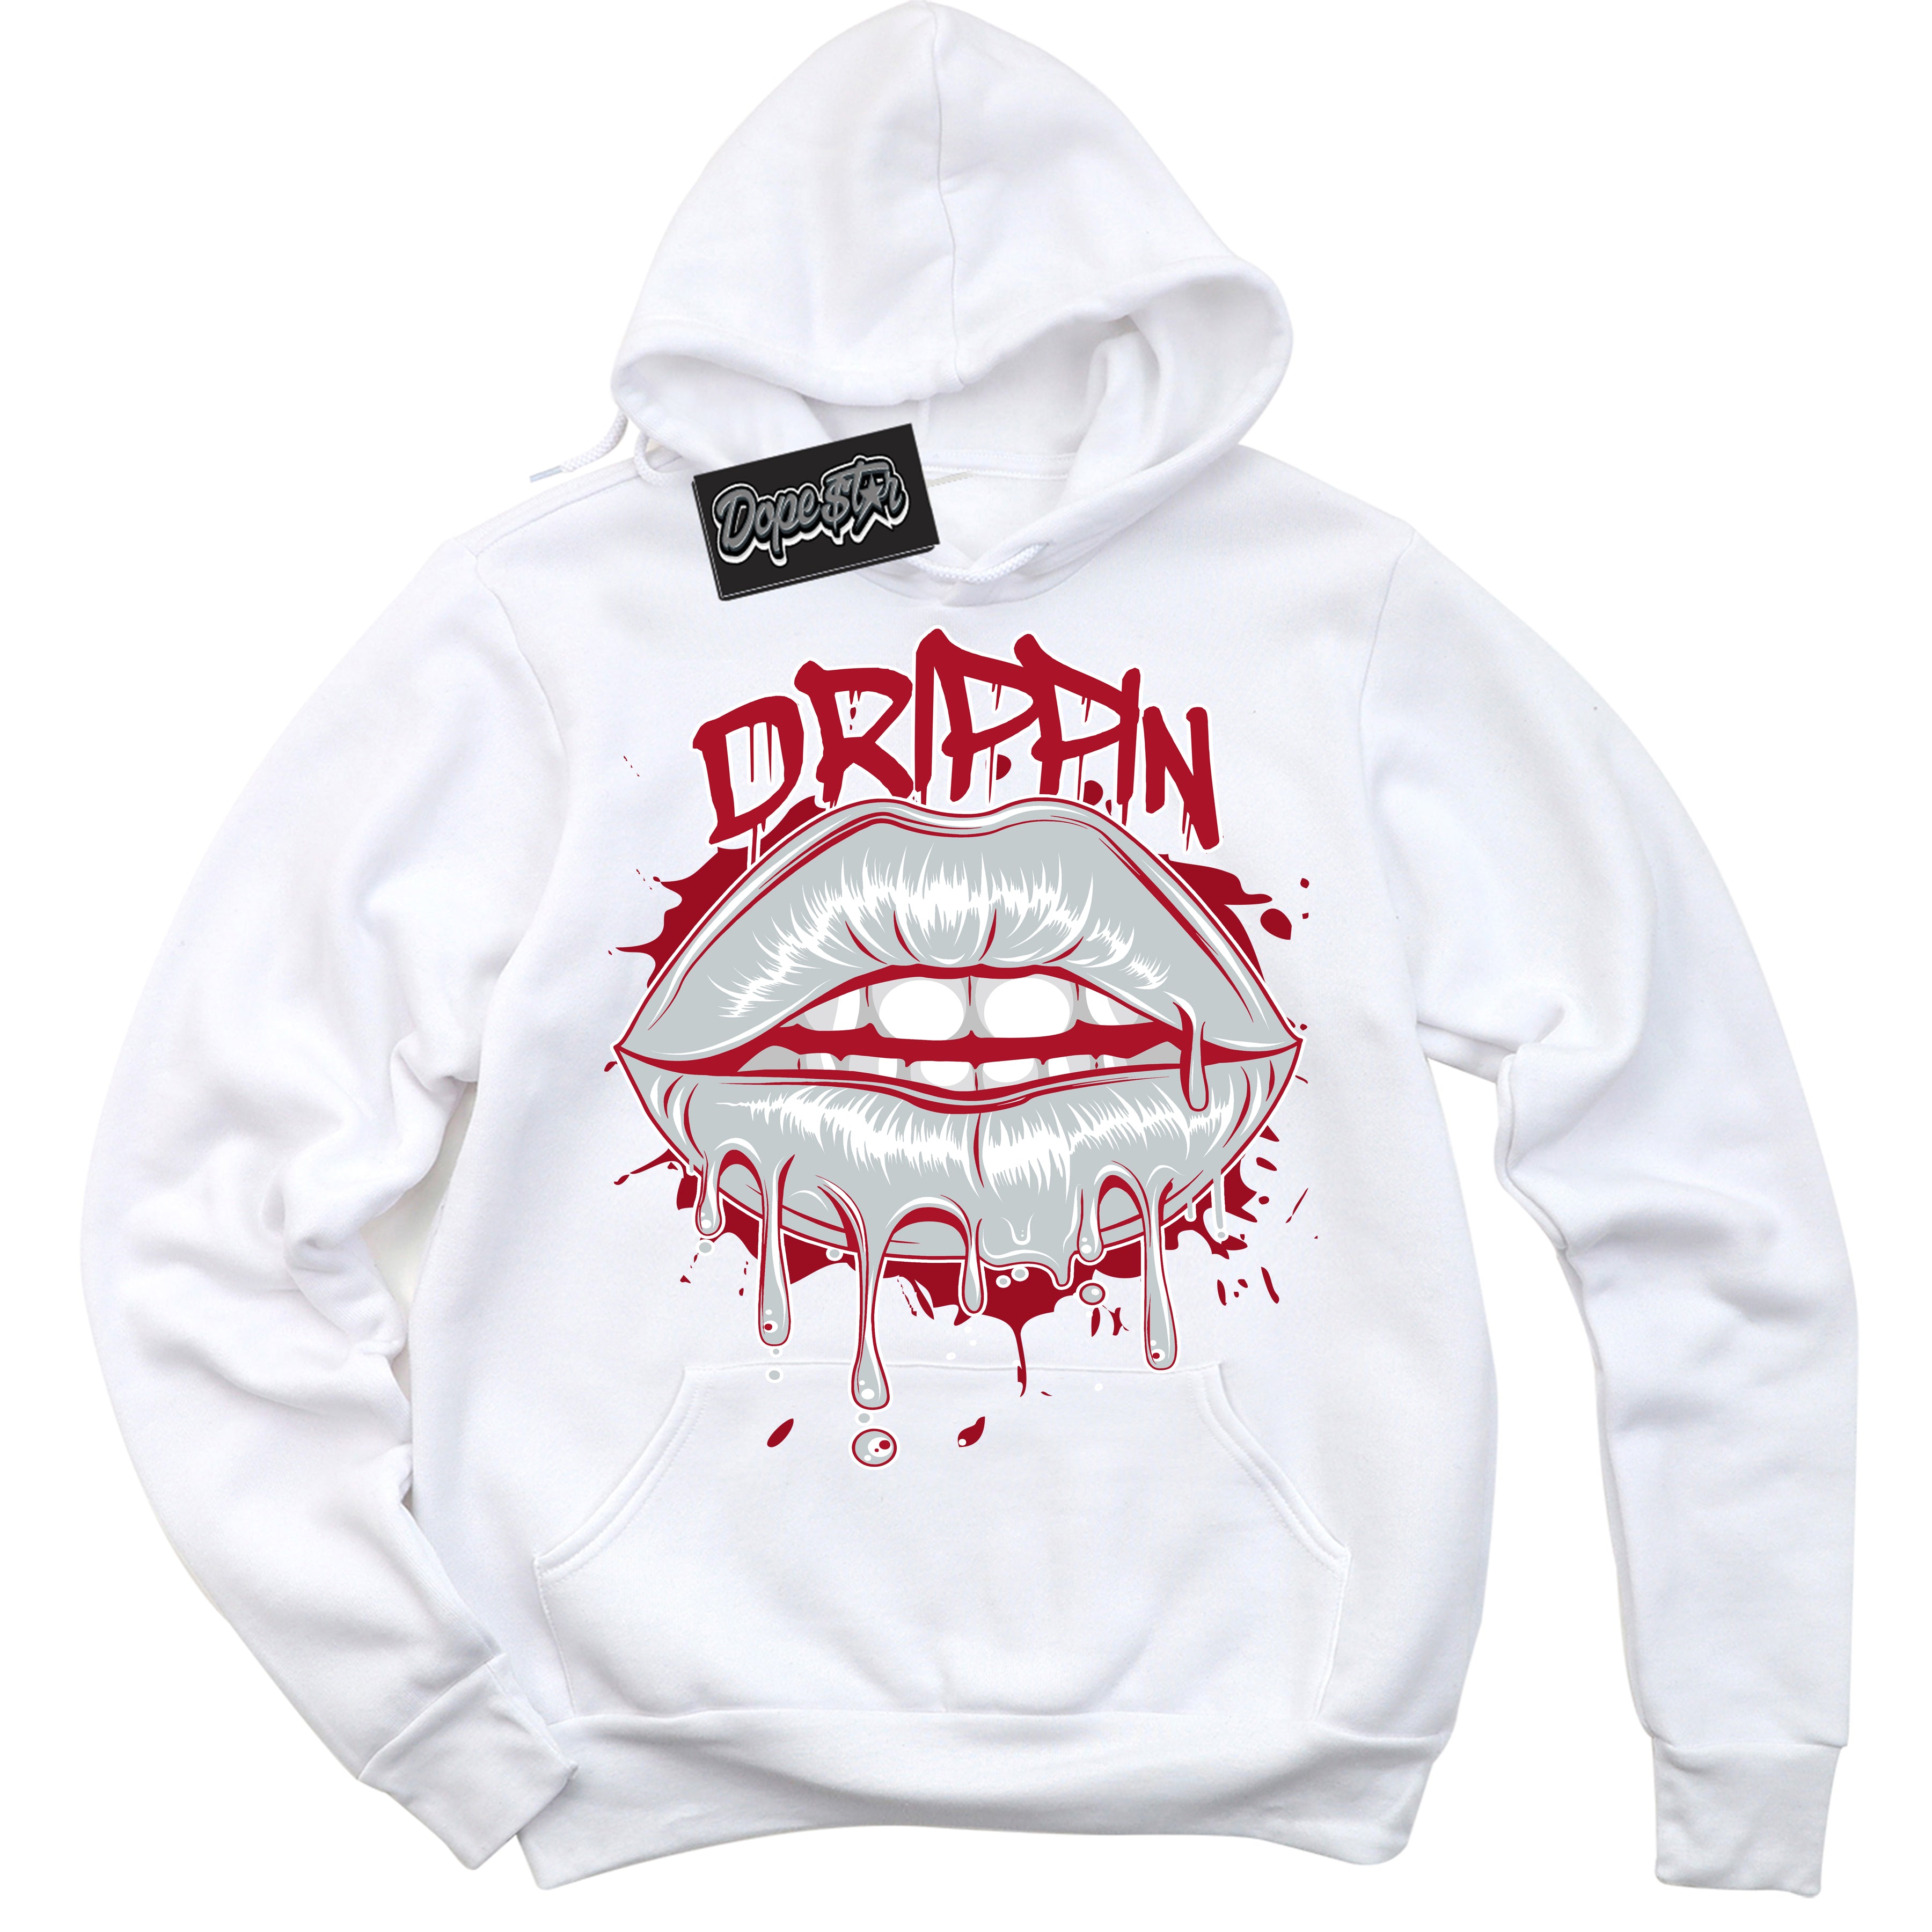 Cool White Hoodie with “ Drippin ”  design that Perfectly Matches  Reverse Ultraman Sneakers.